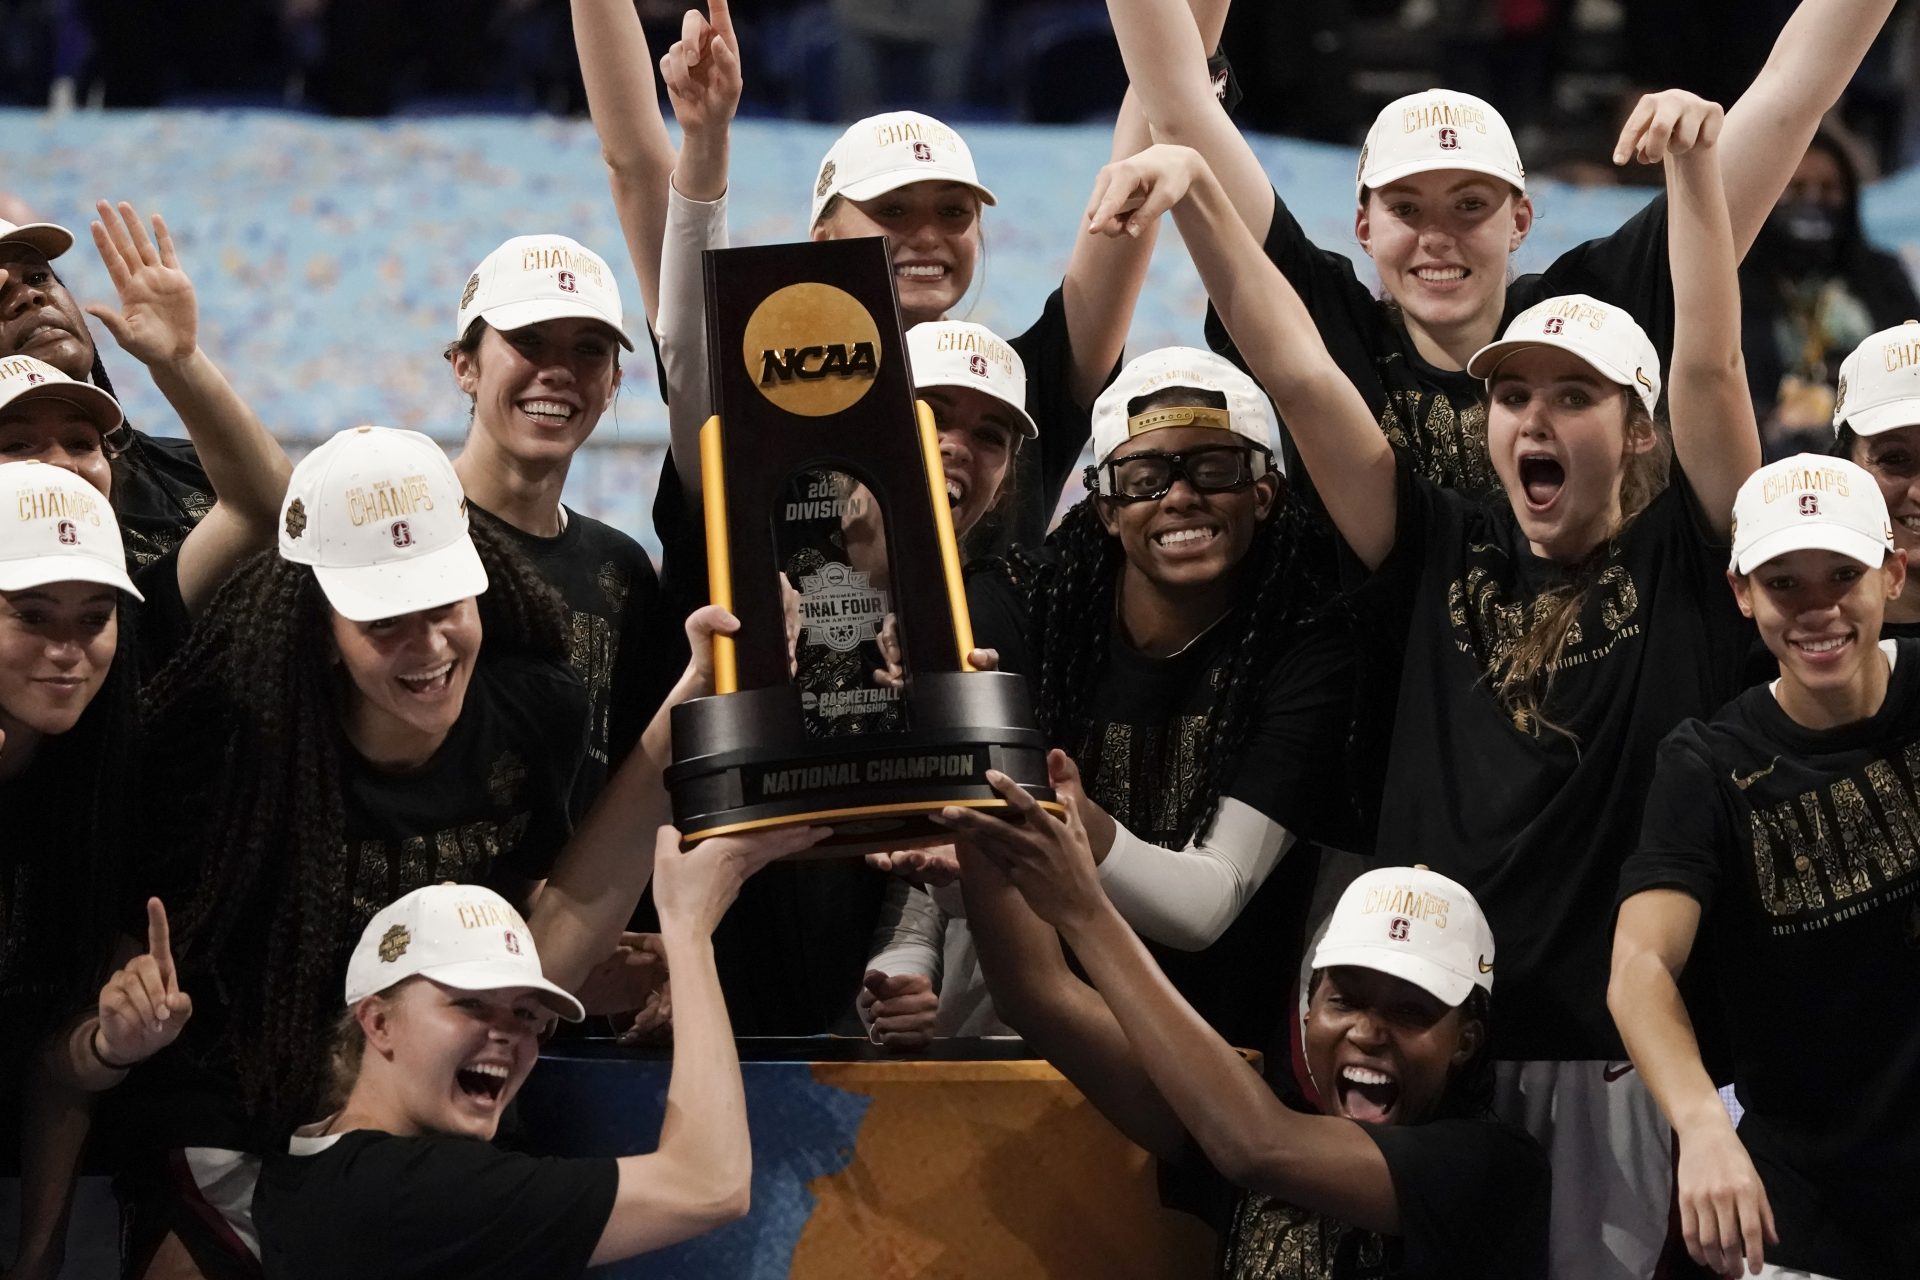 Stanford players celebrate with the trophy after the championship game against Arizona in the women's Final Four NCAA college basketball tournament, Sunday, April 4, 2021, at the Alamodome in San Antonio. Stanford won 54-53.